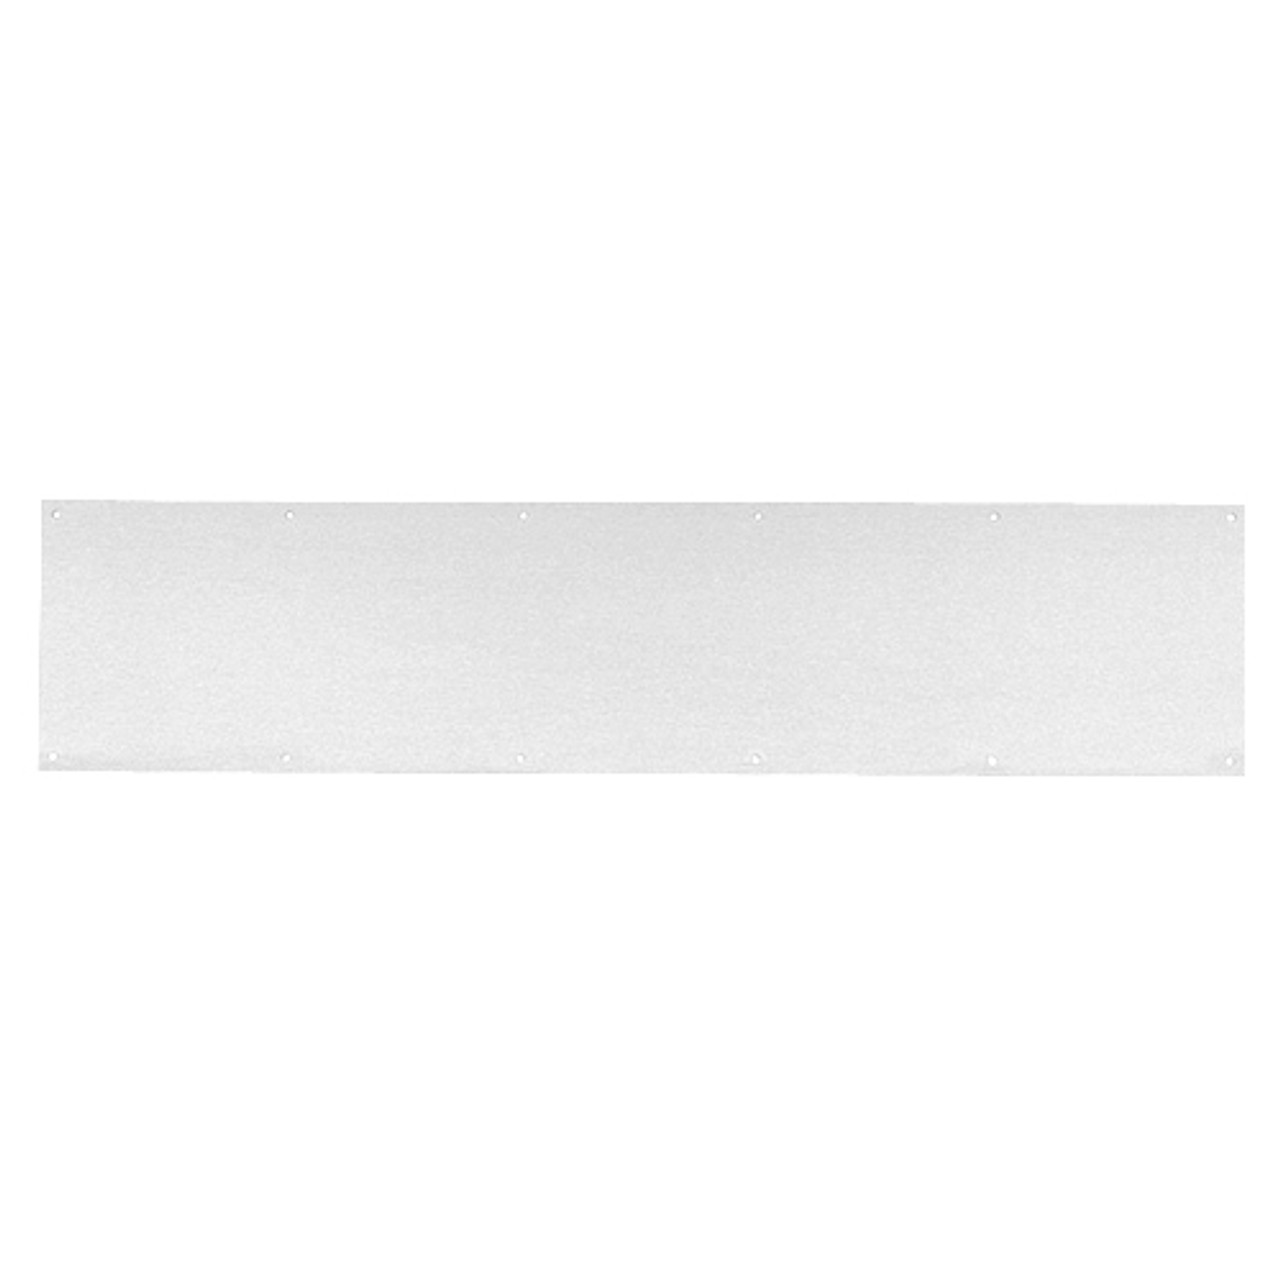 8400-US28-12x34-B-CS Ives 8400 Series Protection Plate in Aluminum